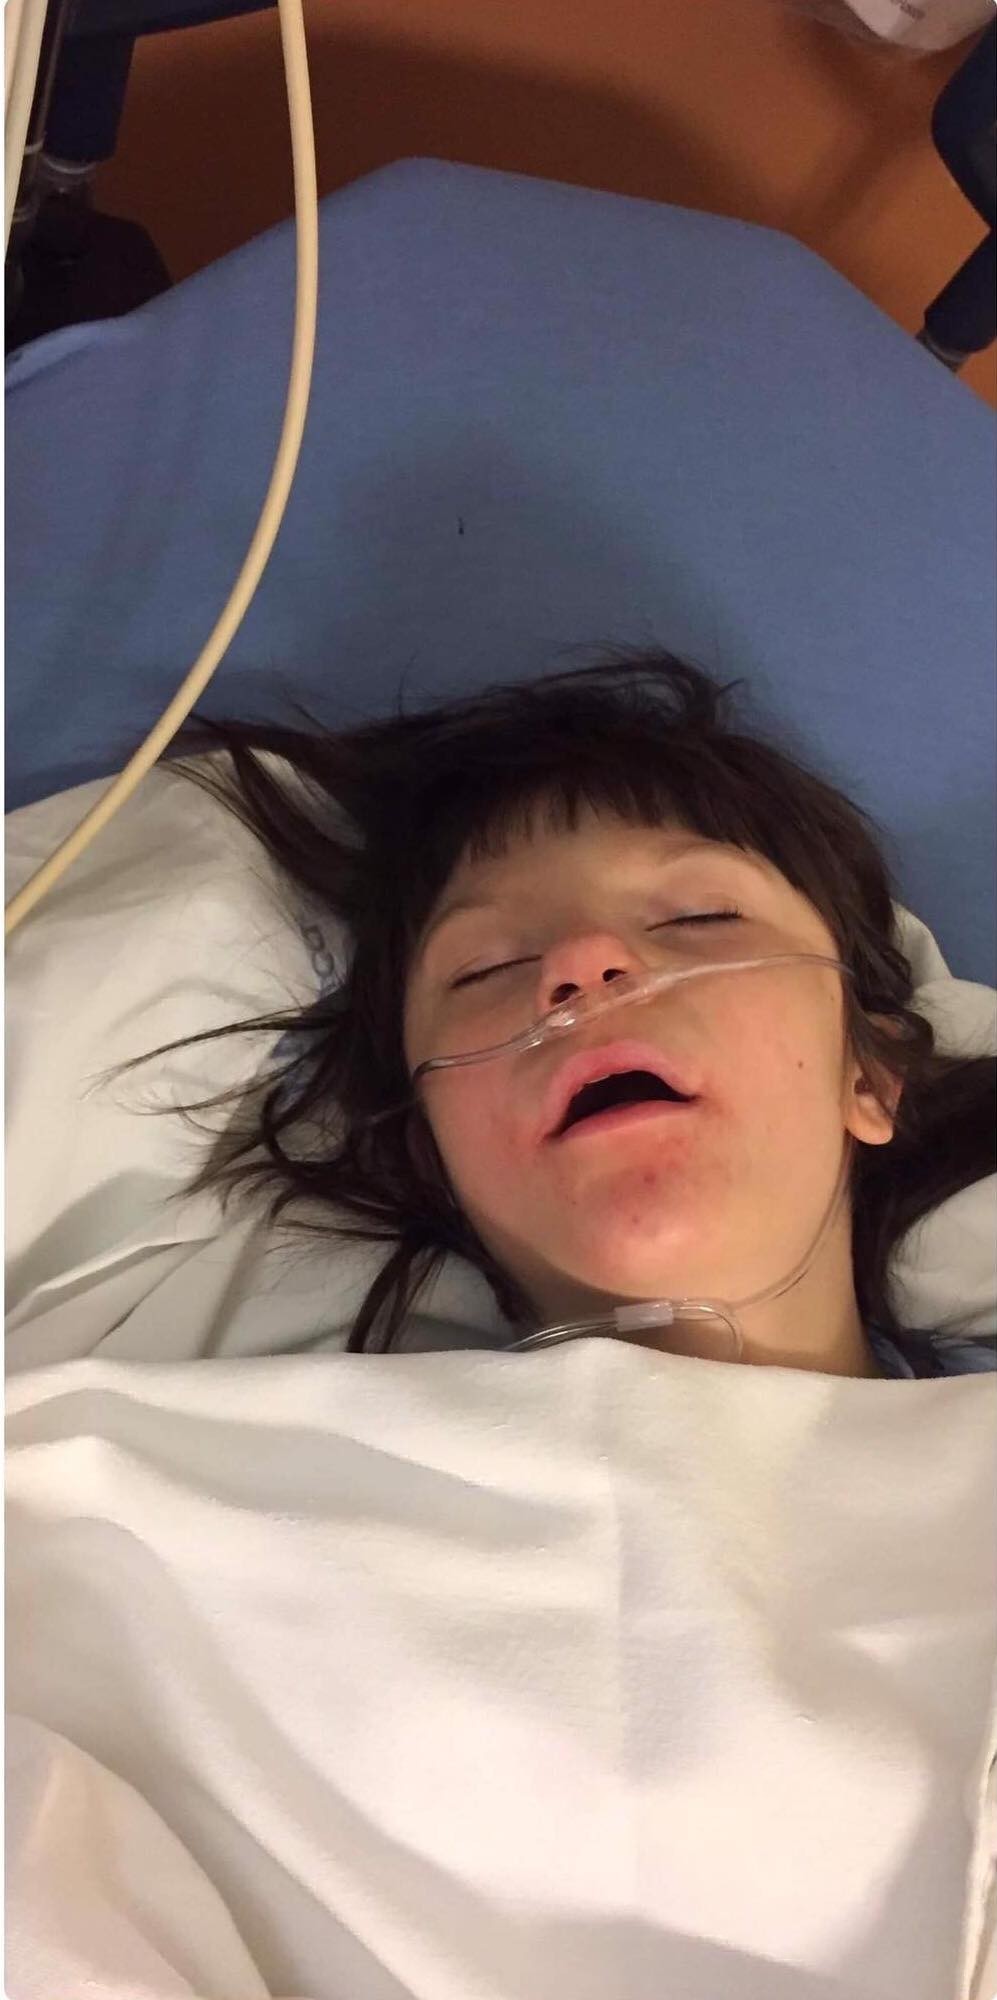 Billy Caldwell was left hospitalised after his medical cannabis was confiscated at London Heathrow (30937628)